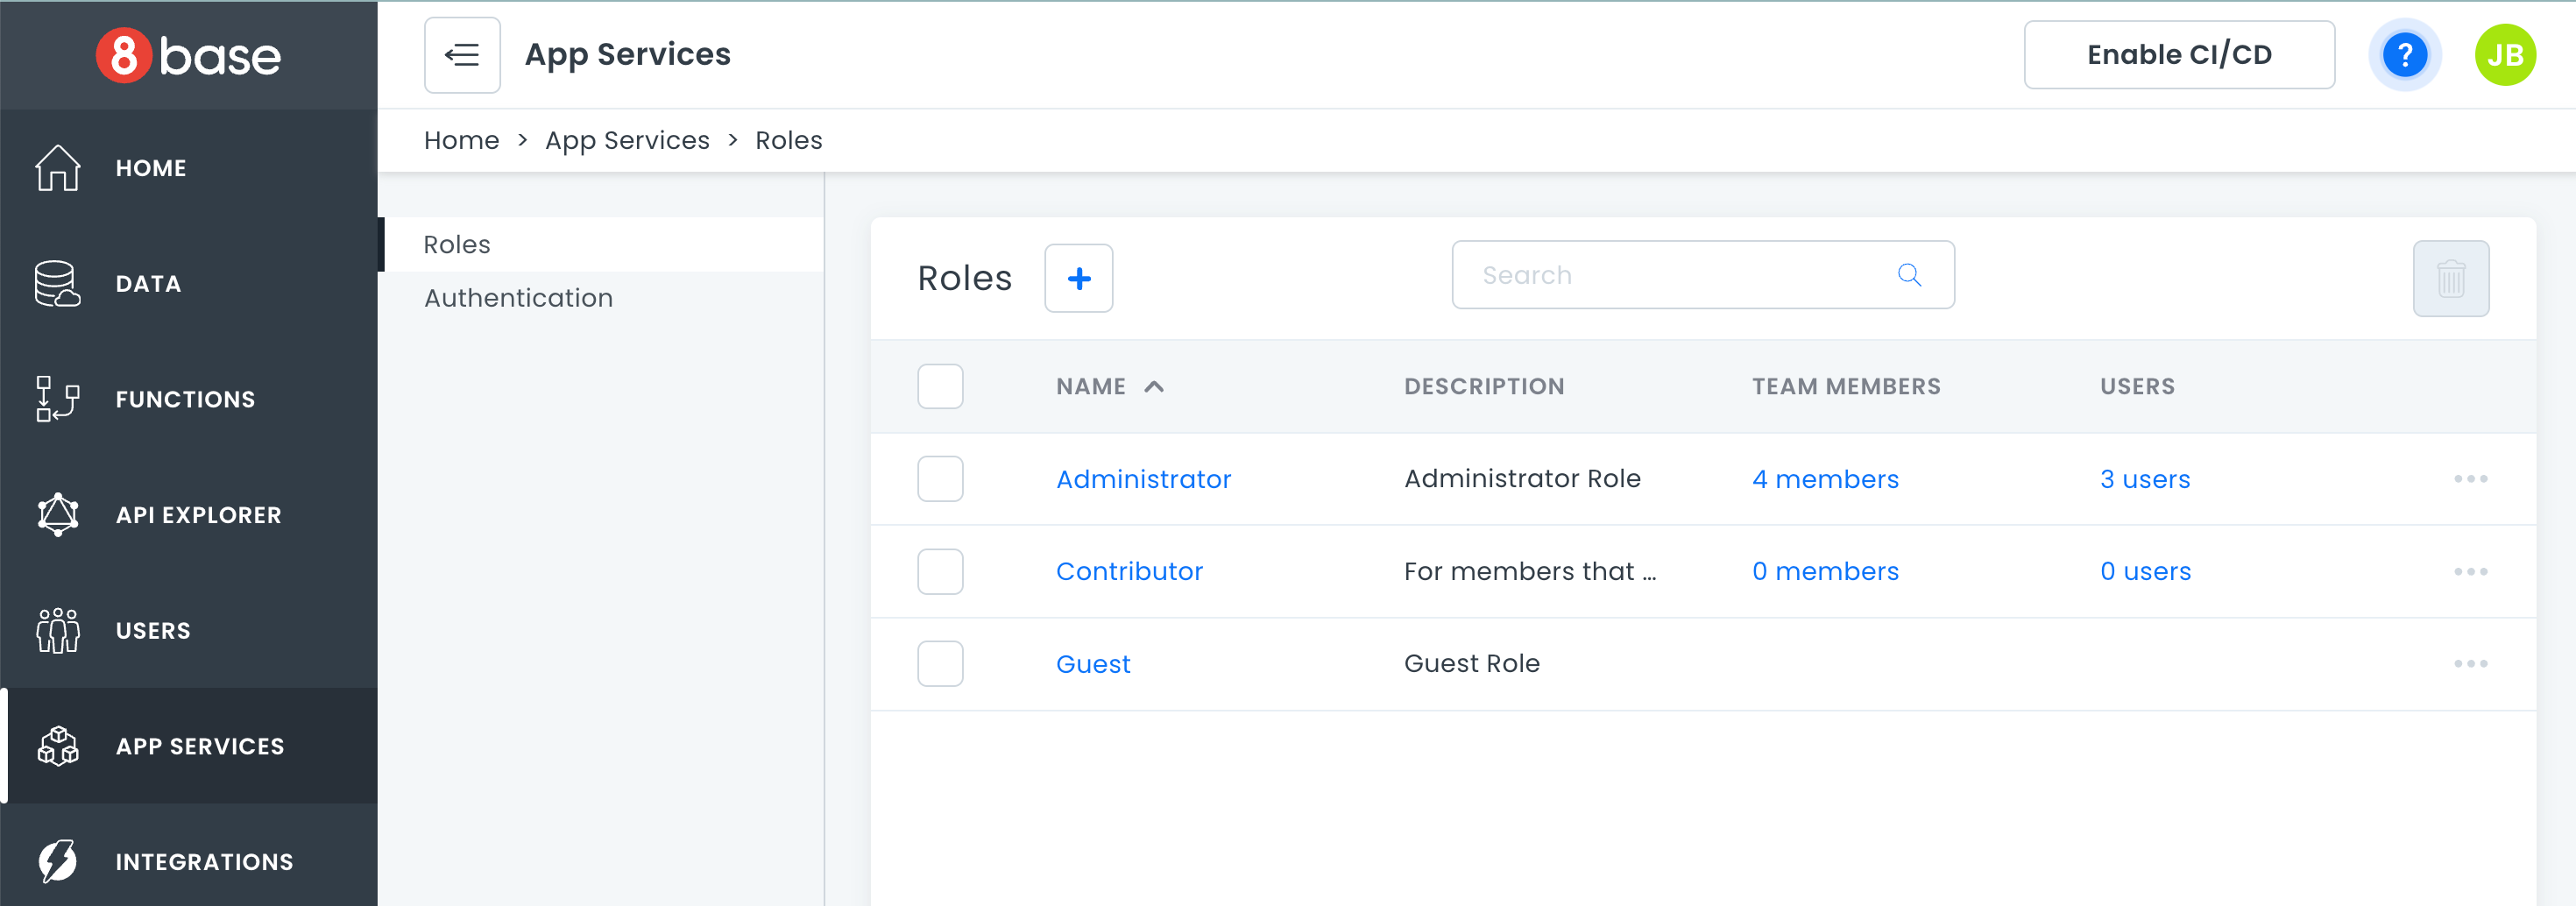 Roles Management Screen in 8base Console